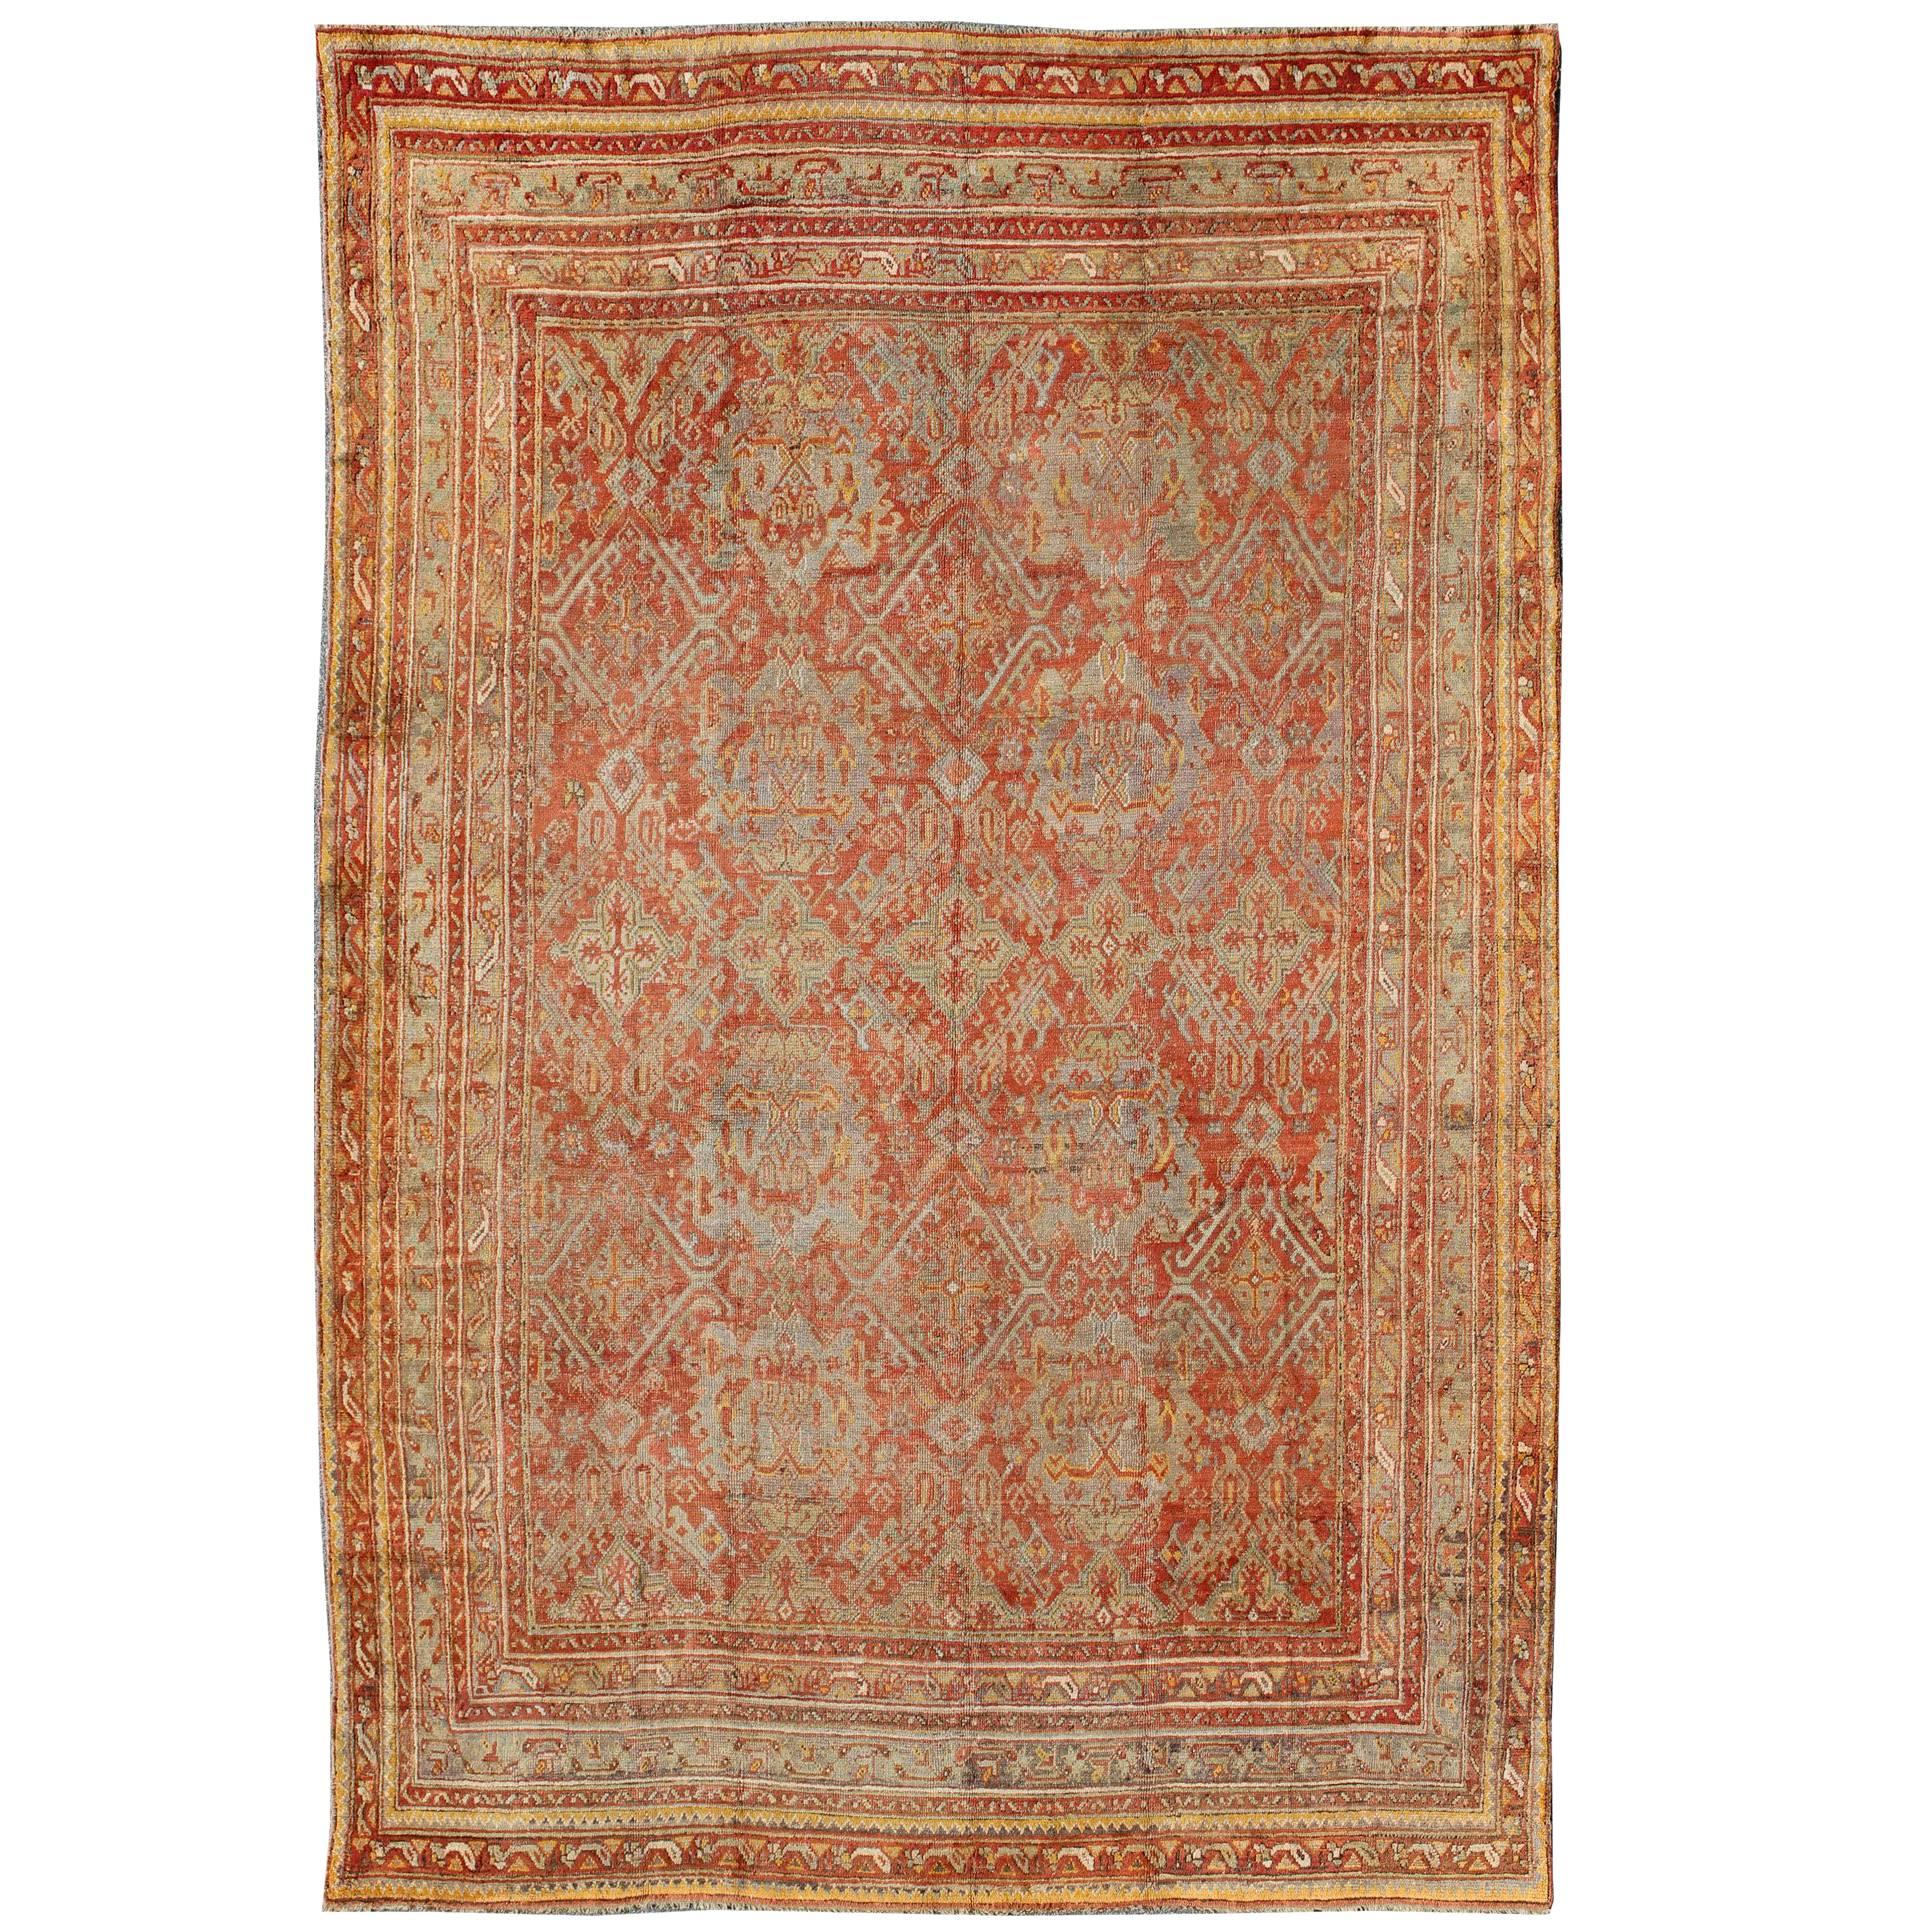 Antique Turkish Oushak Rug with Geometric Design in Soft Red, Light Blue, Yellow